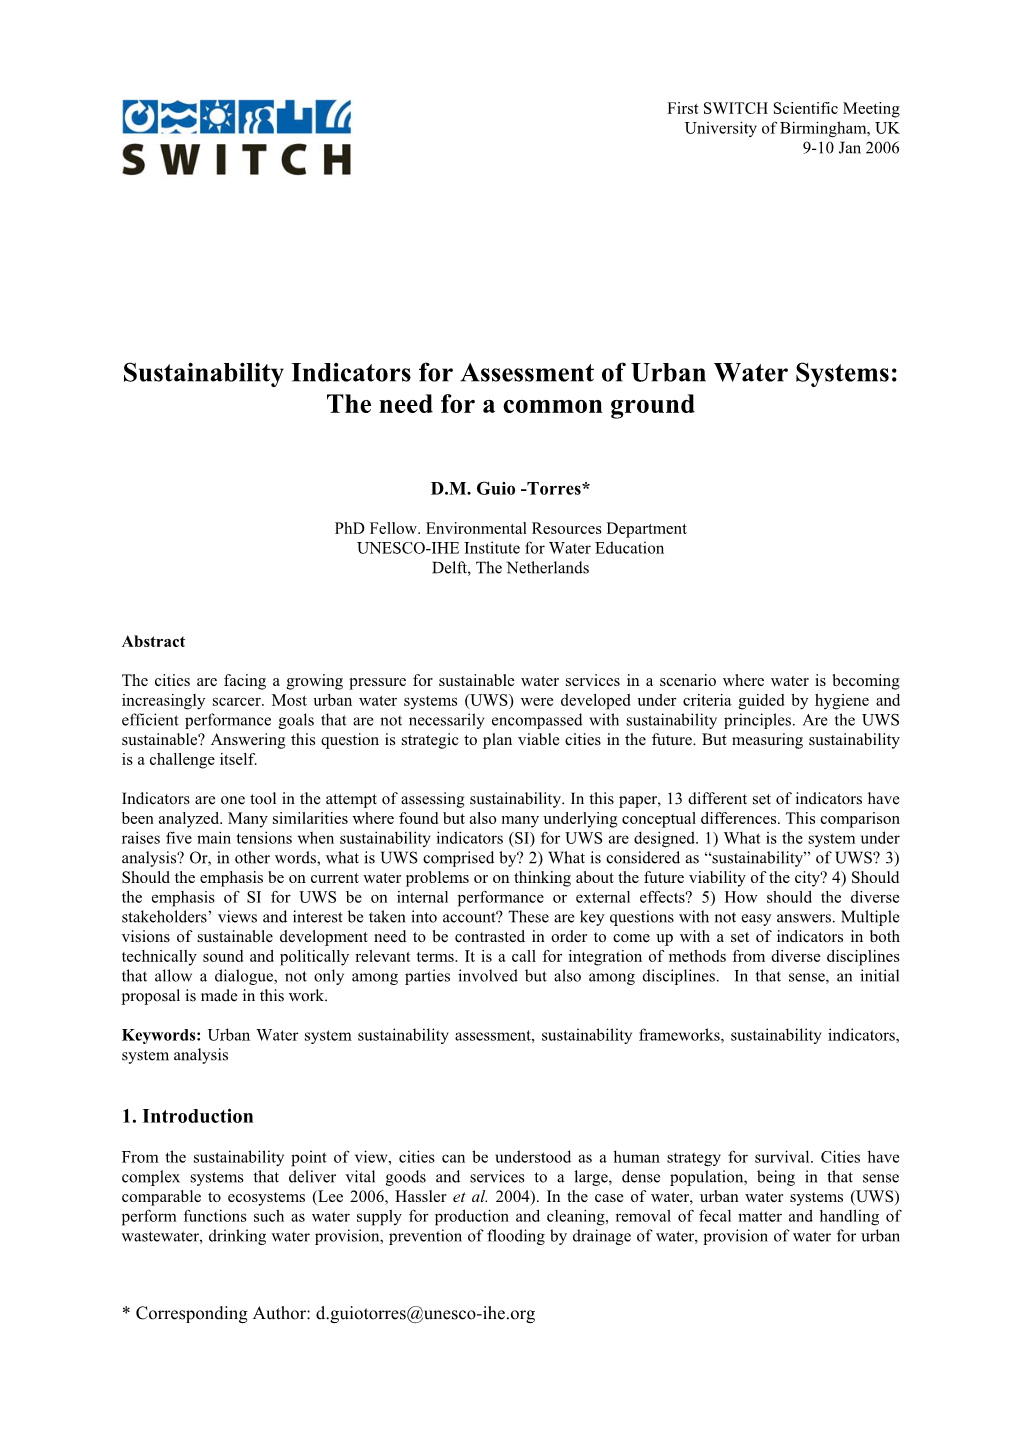 Sustainability Indicators for Assessment of Urban Water Systems: the Need for a Common Ground